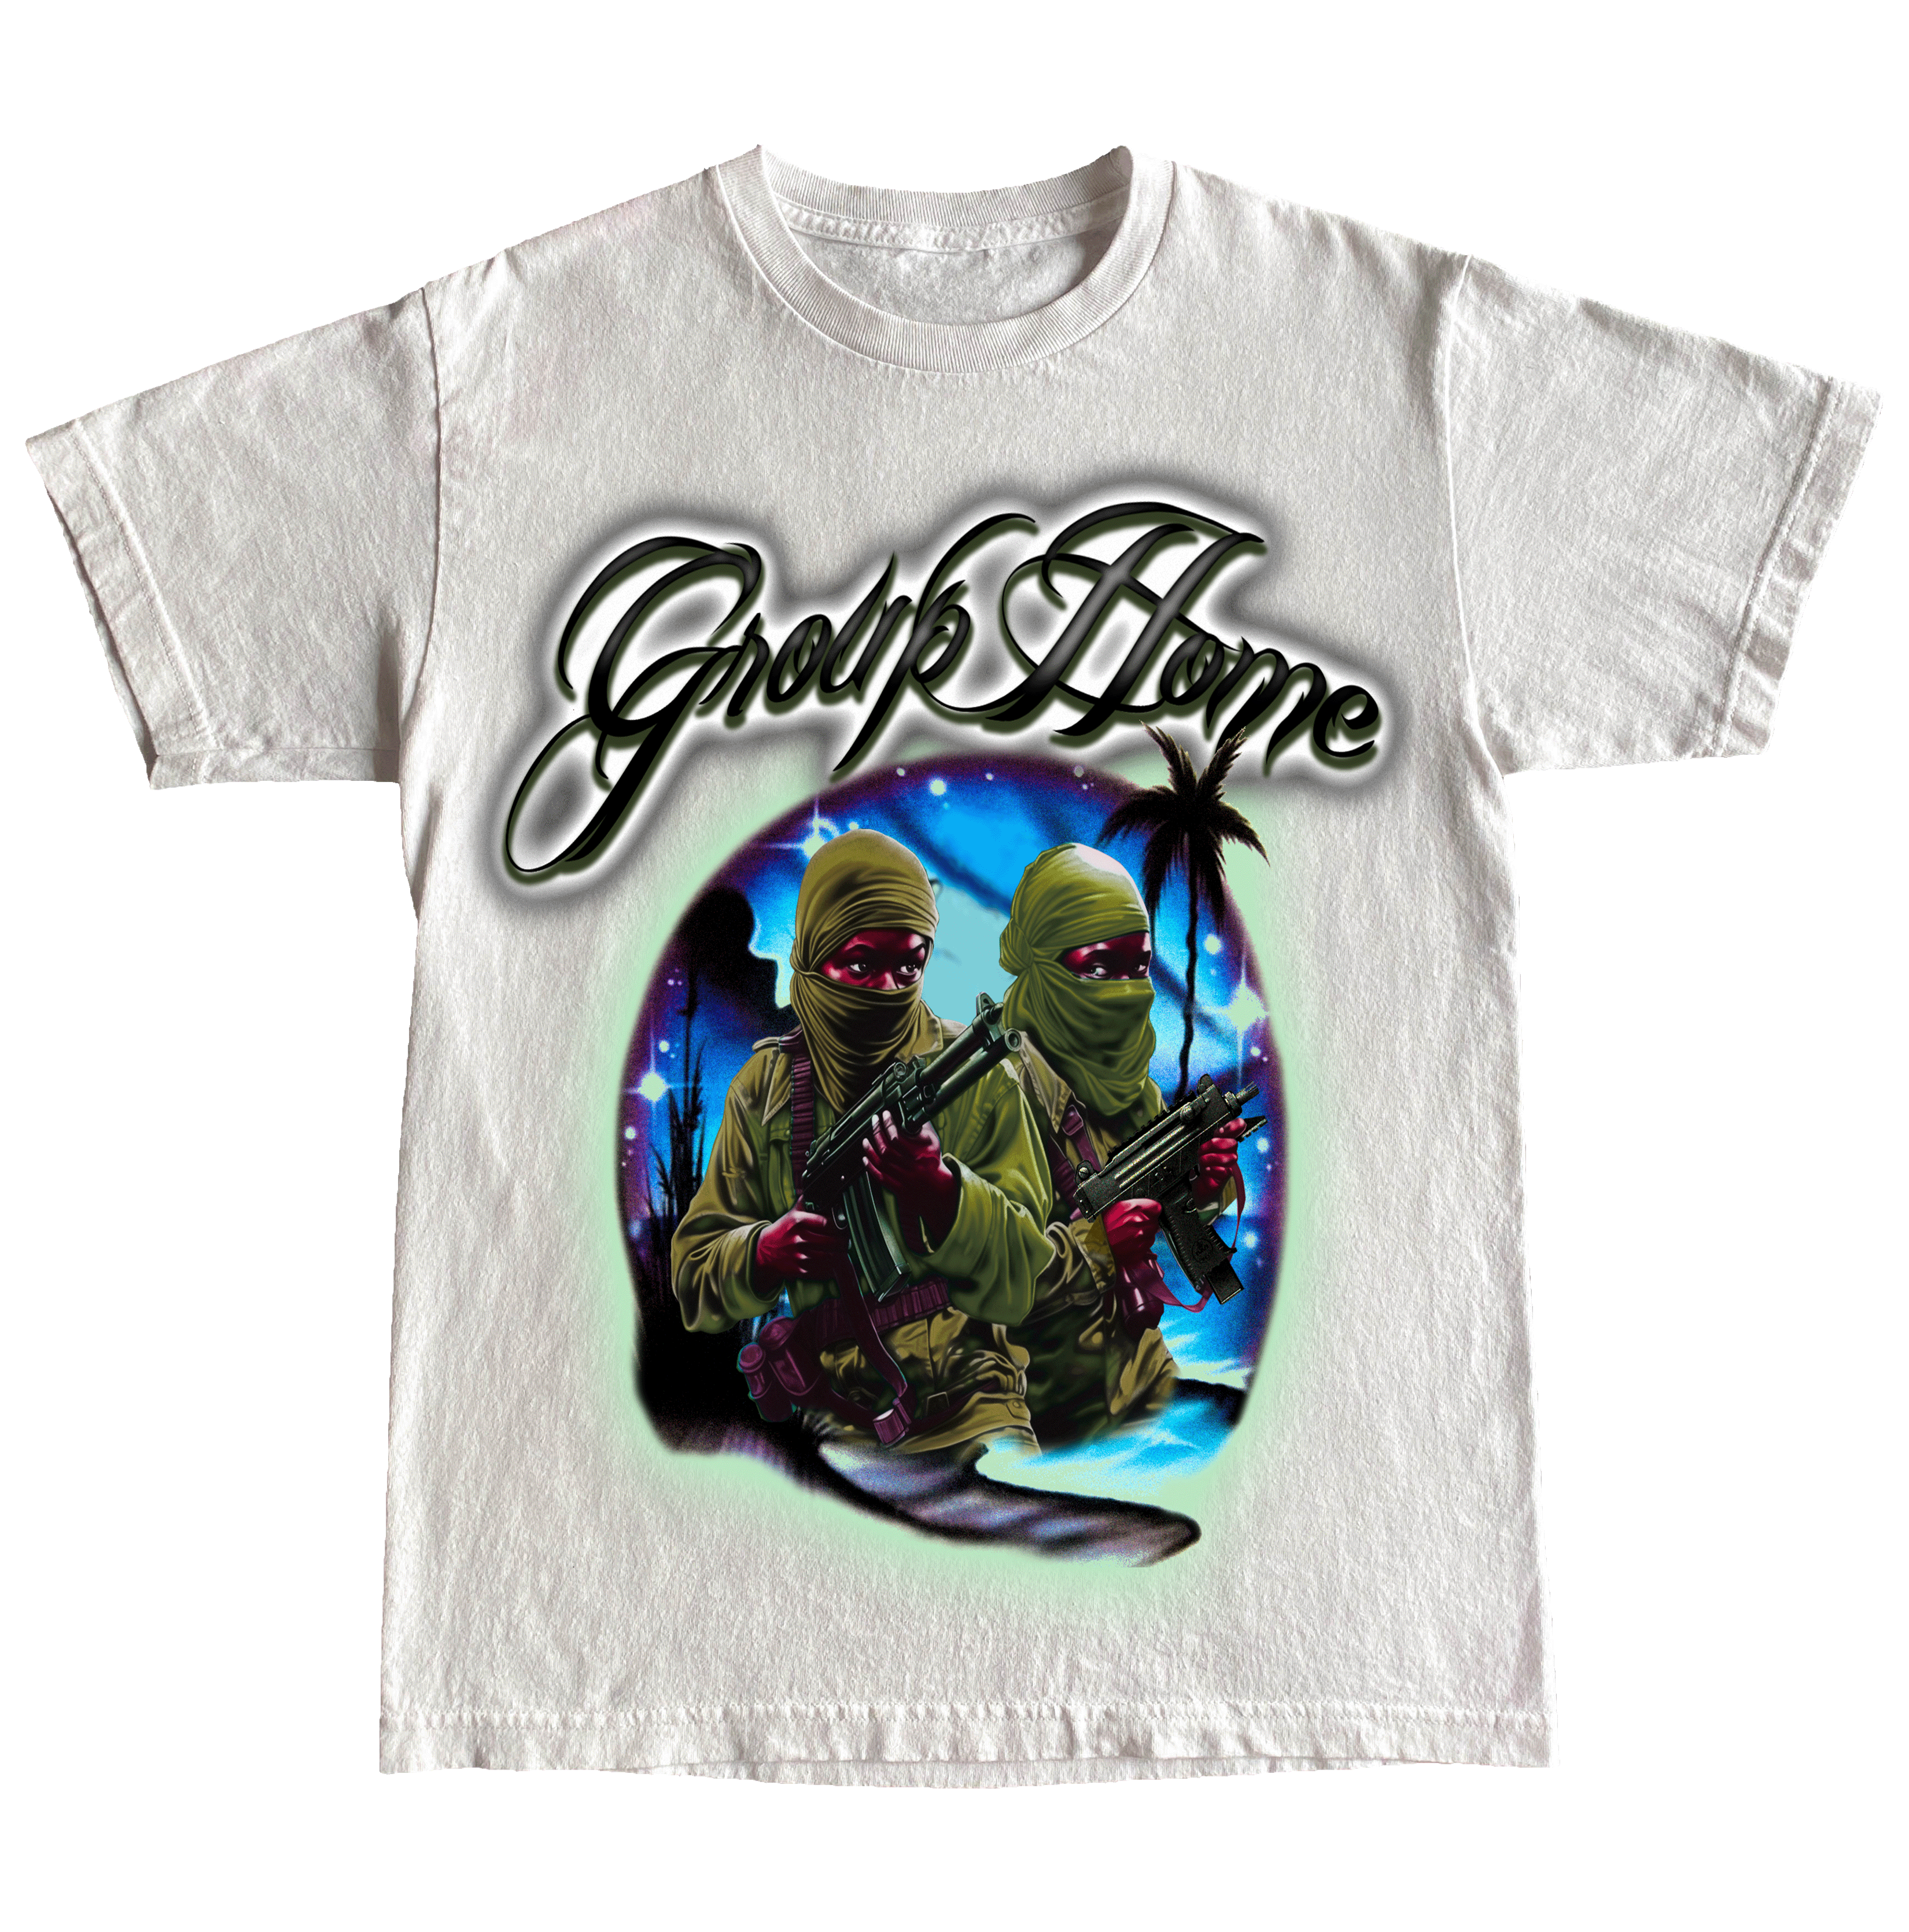 Group Home War Ready 20 USD (Sold Out)